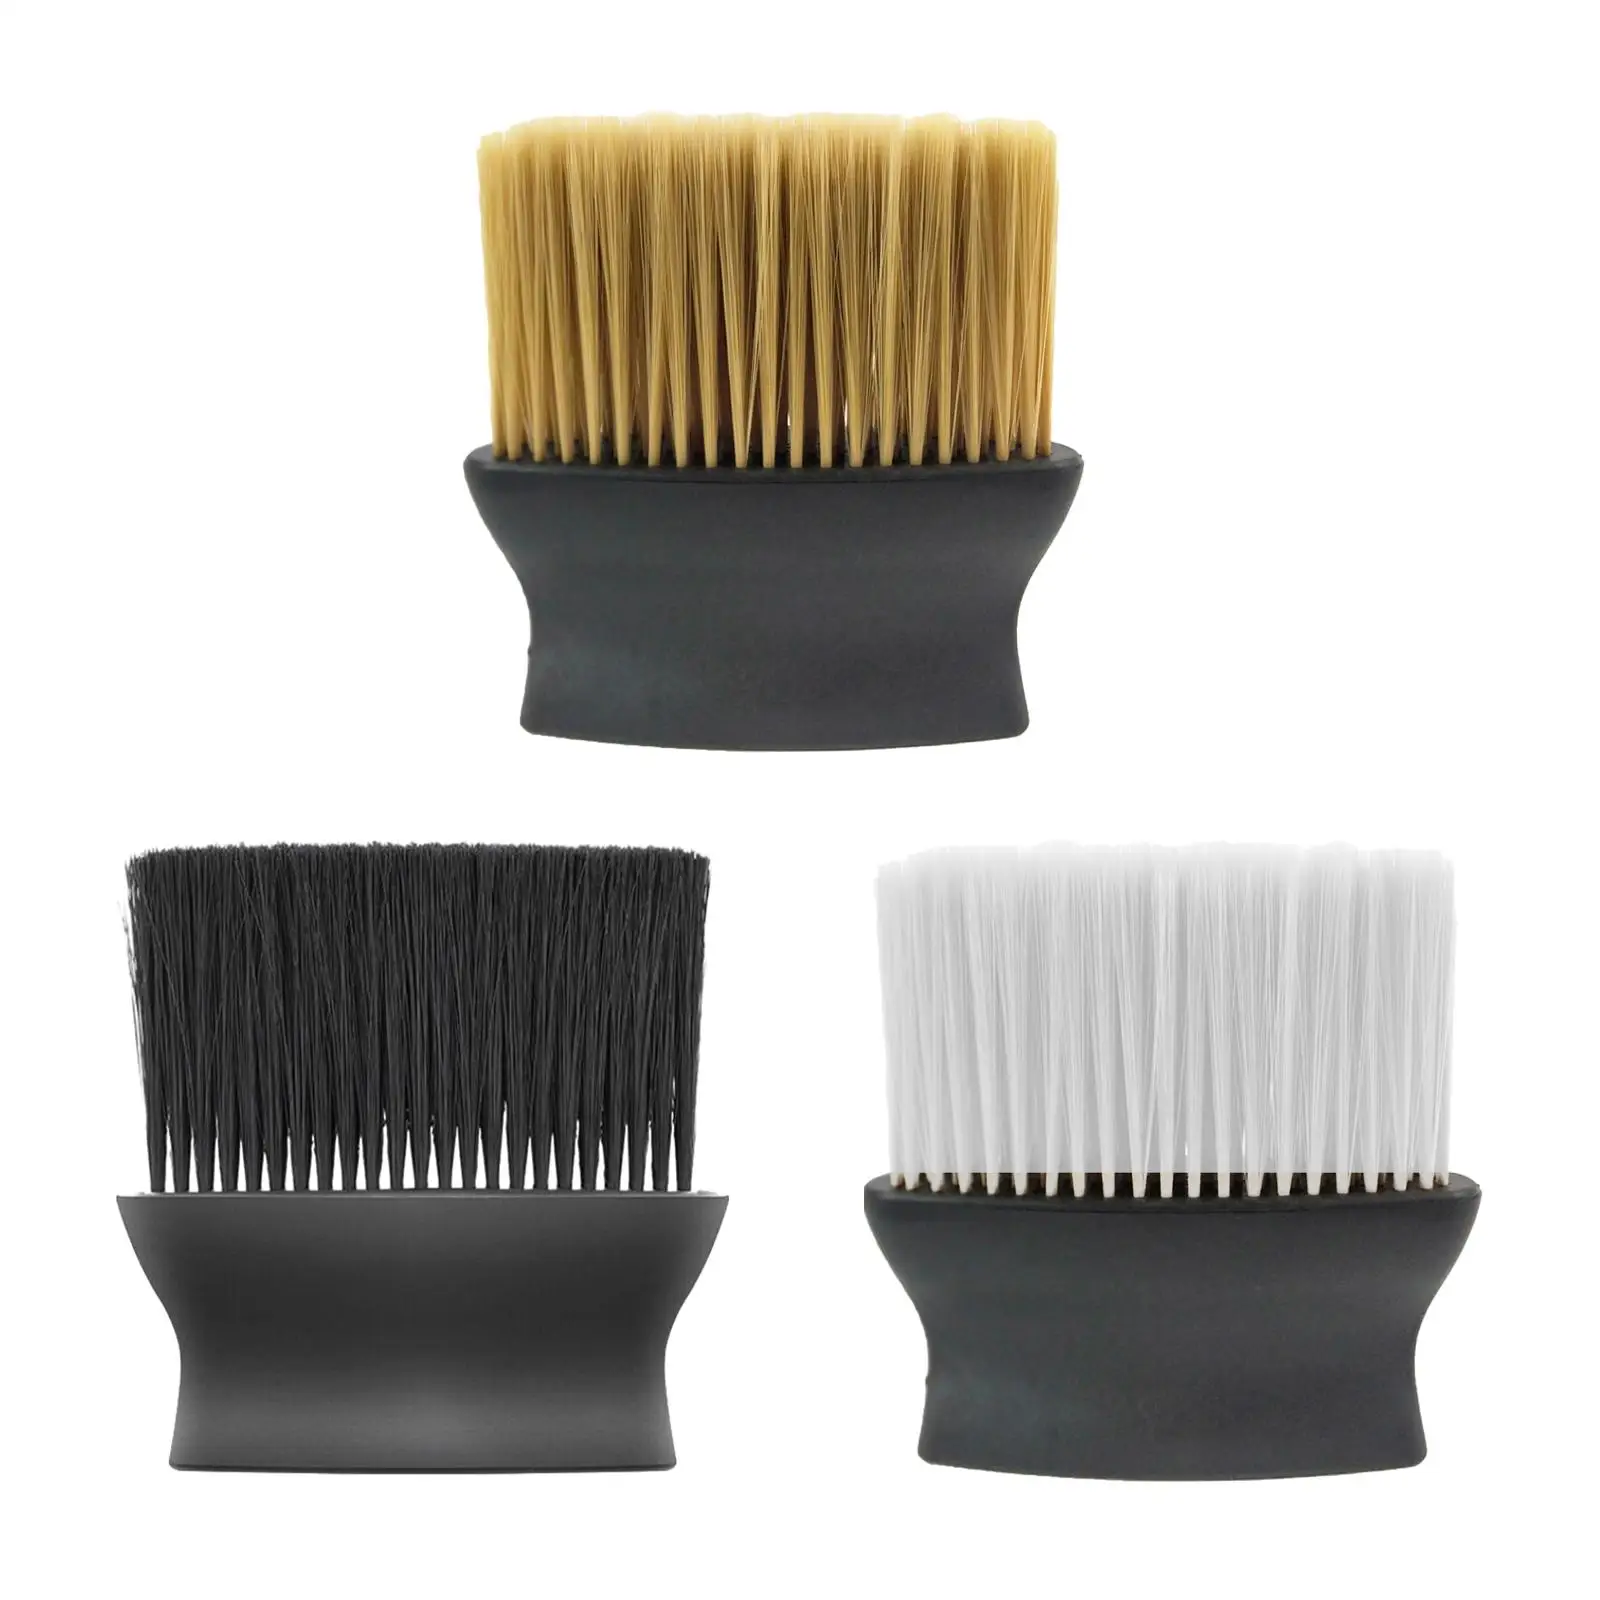 Car Interior Duster Multipurpose Curved Design Long Bristles Automotive Cleaning Brush for Sofa Seat Air Conditioner Vents